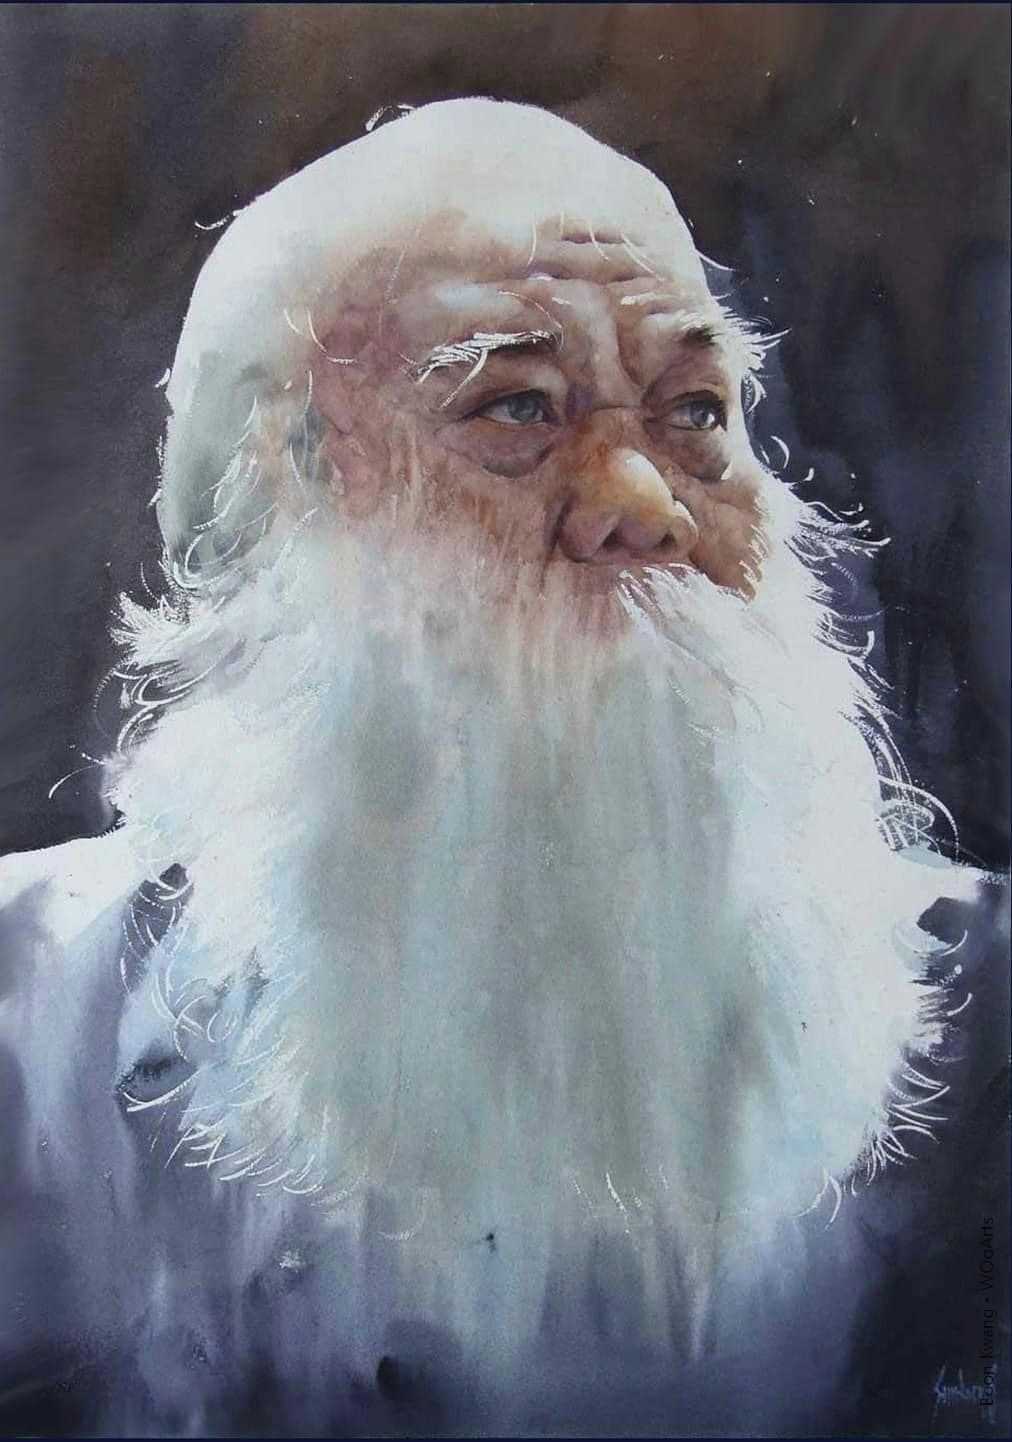 Painting by Boon Kwang